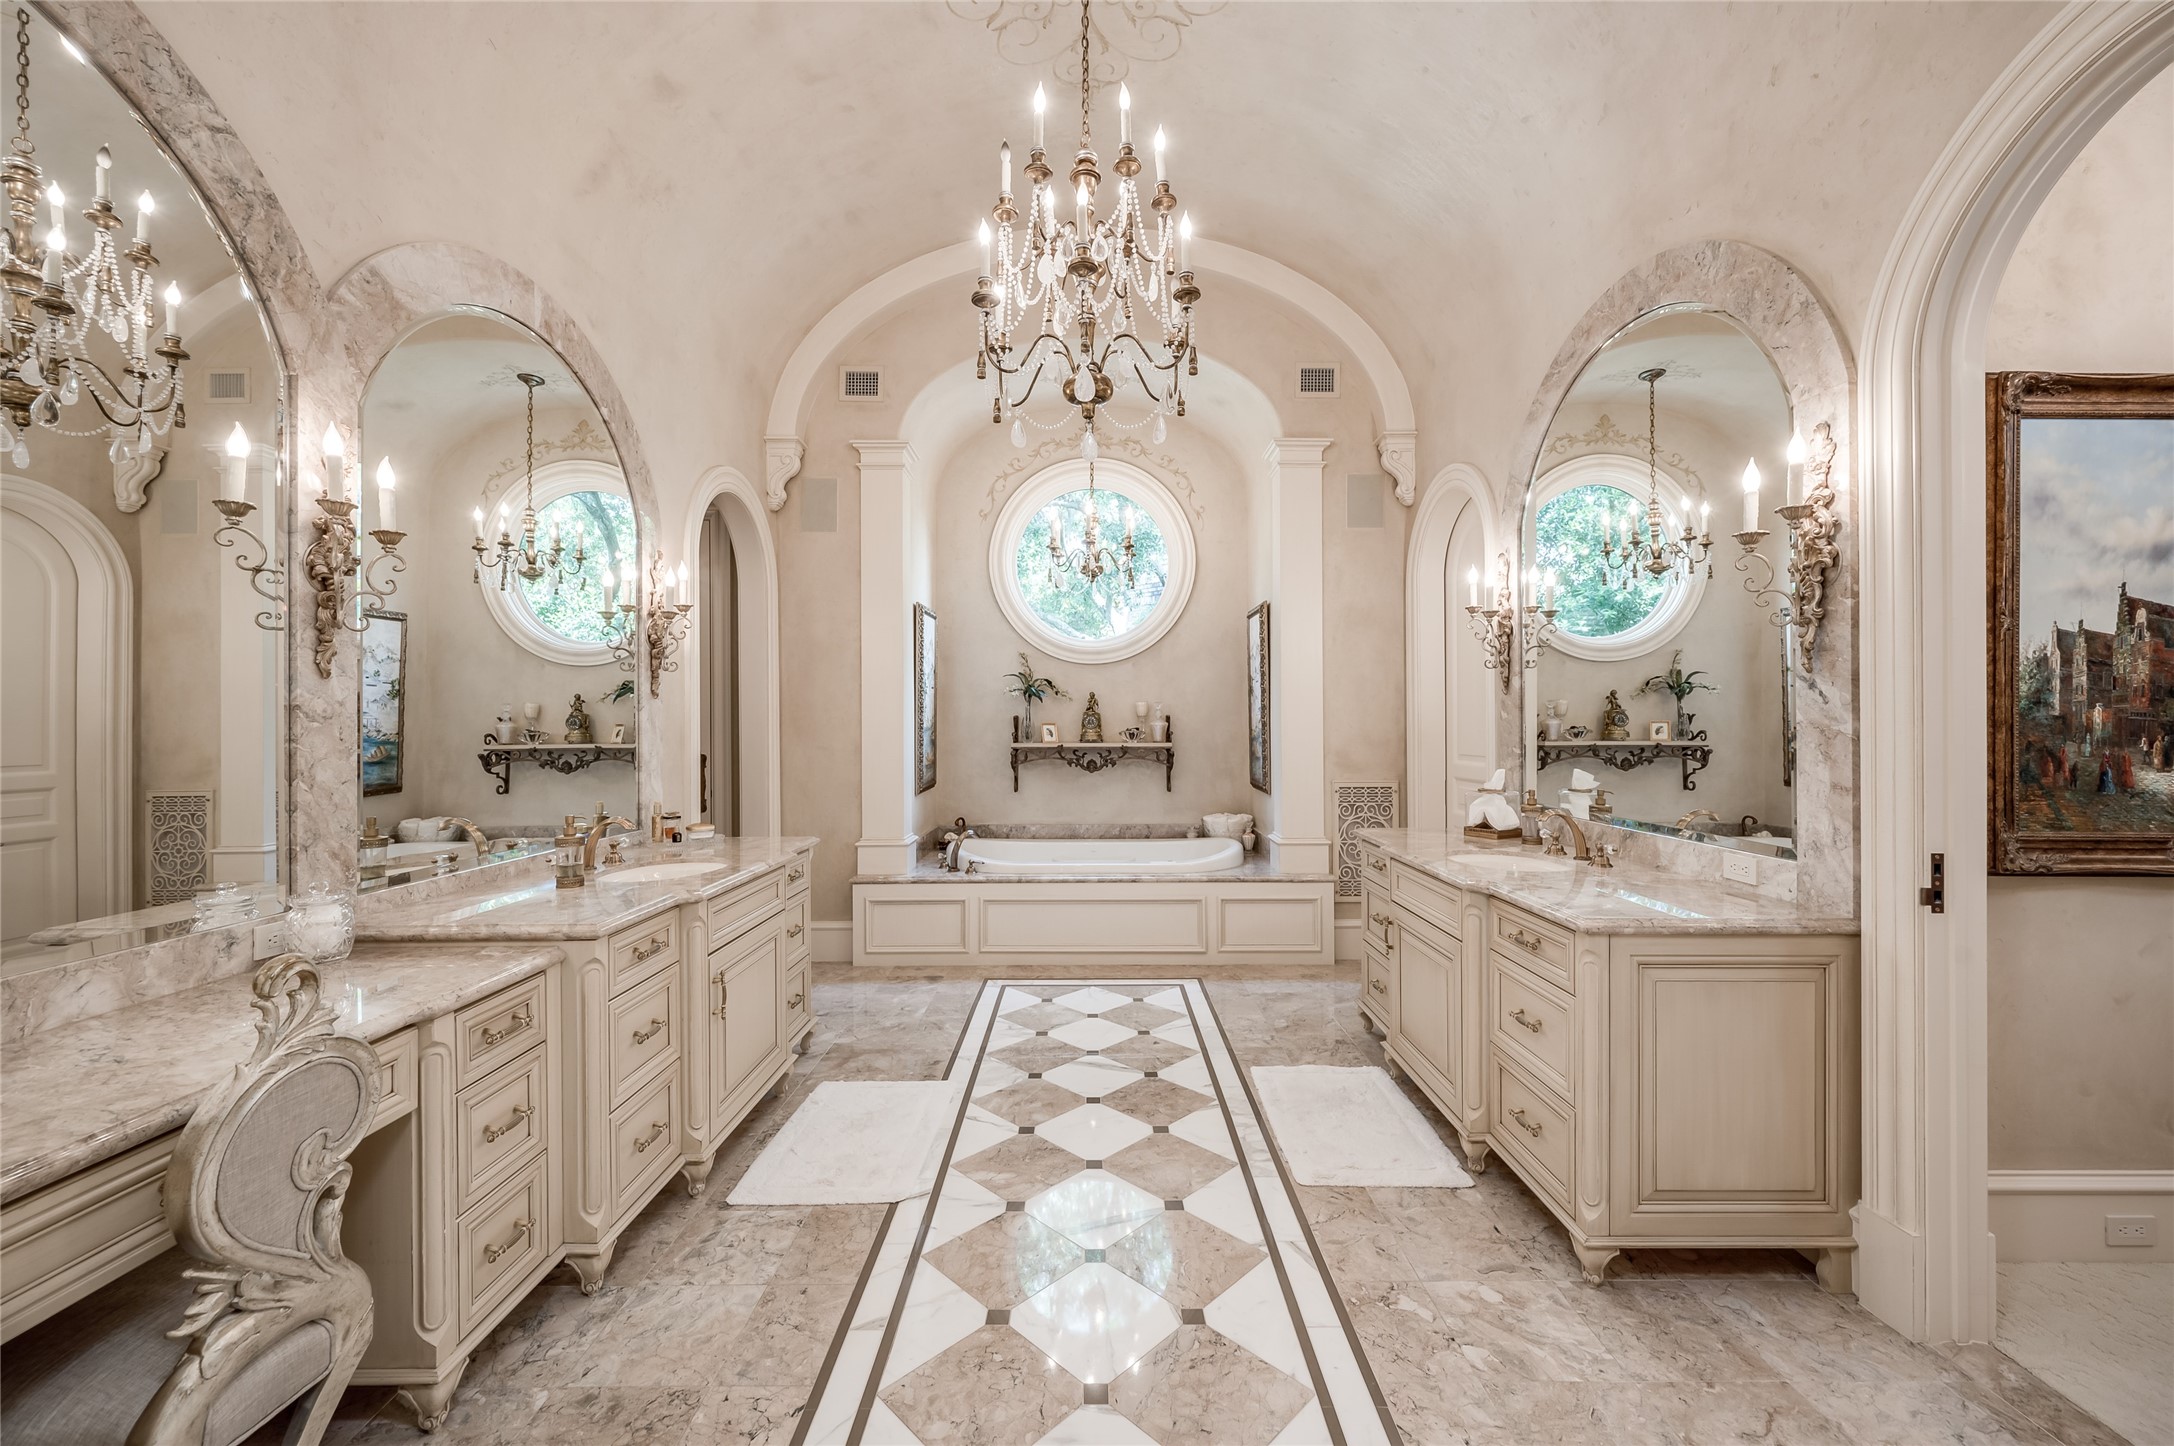 [Primary Bath]
The sumptuous primary bath has a barrel ceiling, marble double sink decks, two water closets, two dressing areas, a vanity, Bain Ultra air tub, and a shower room with kidney-shaped bench.